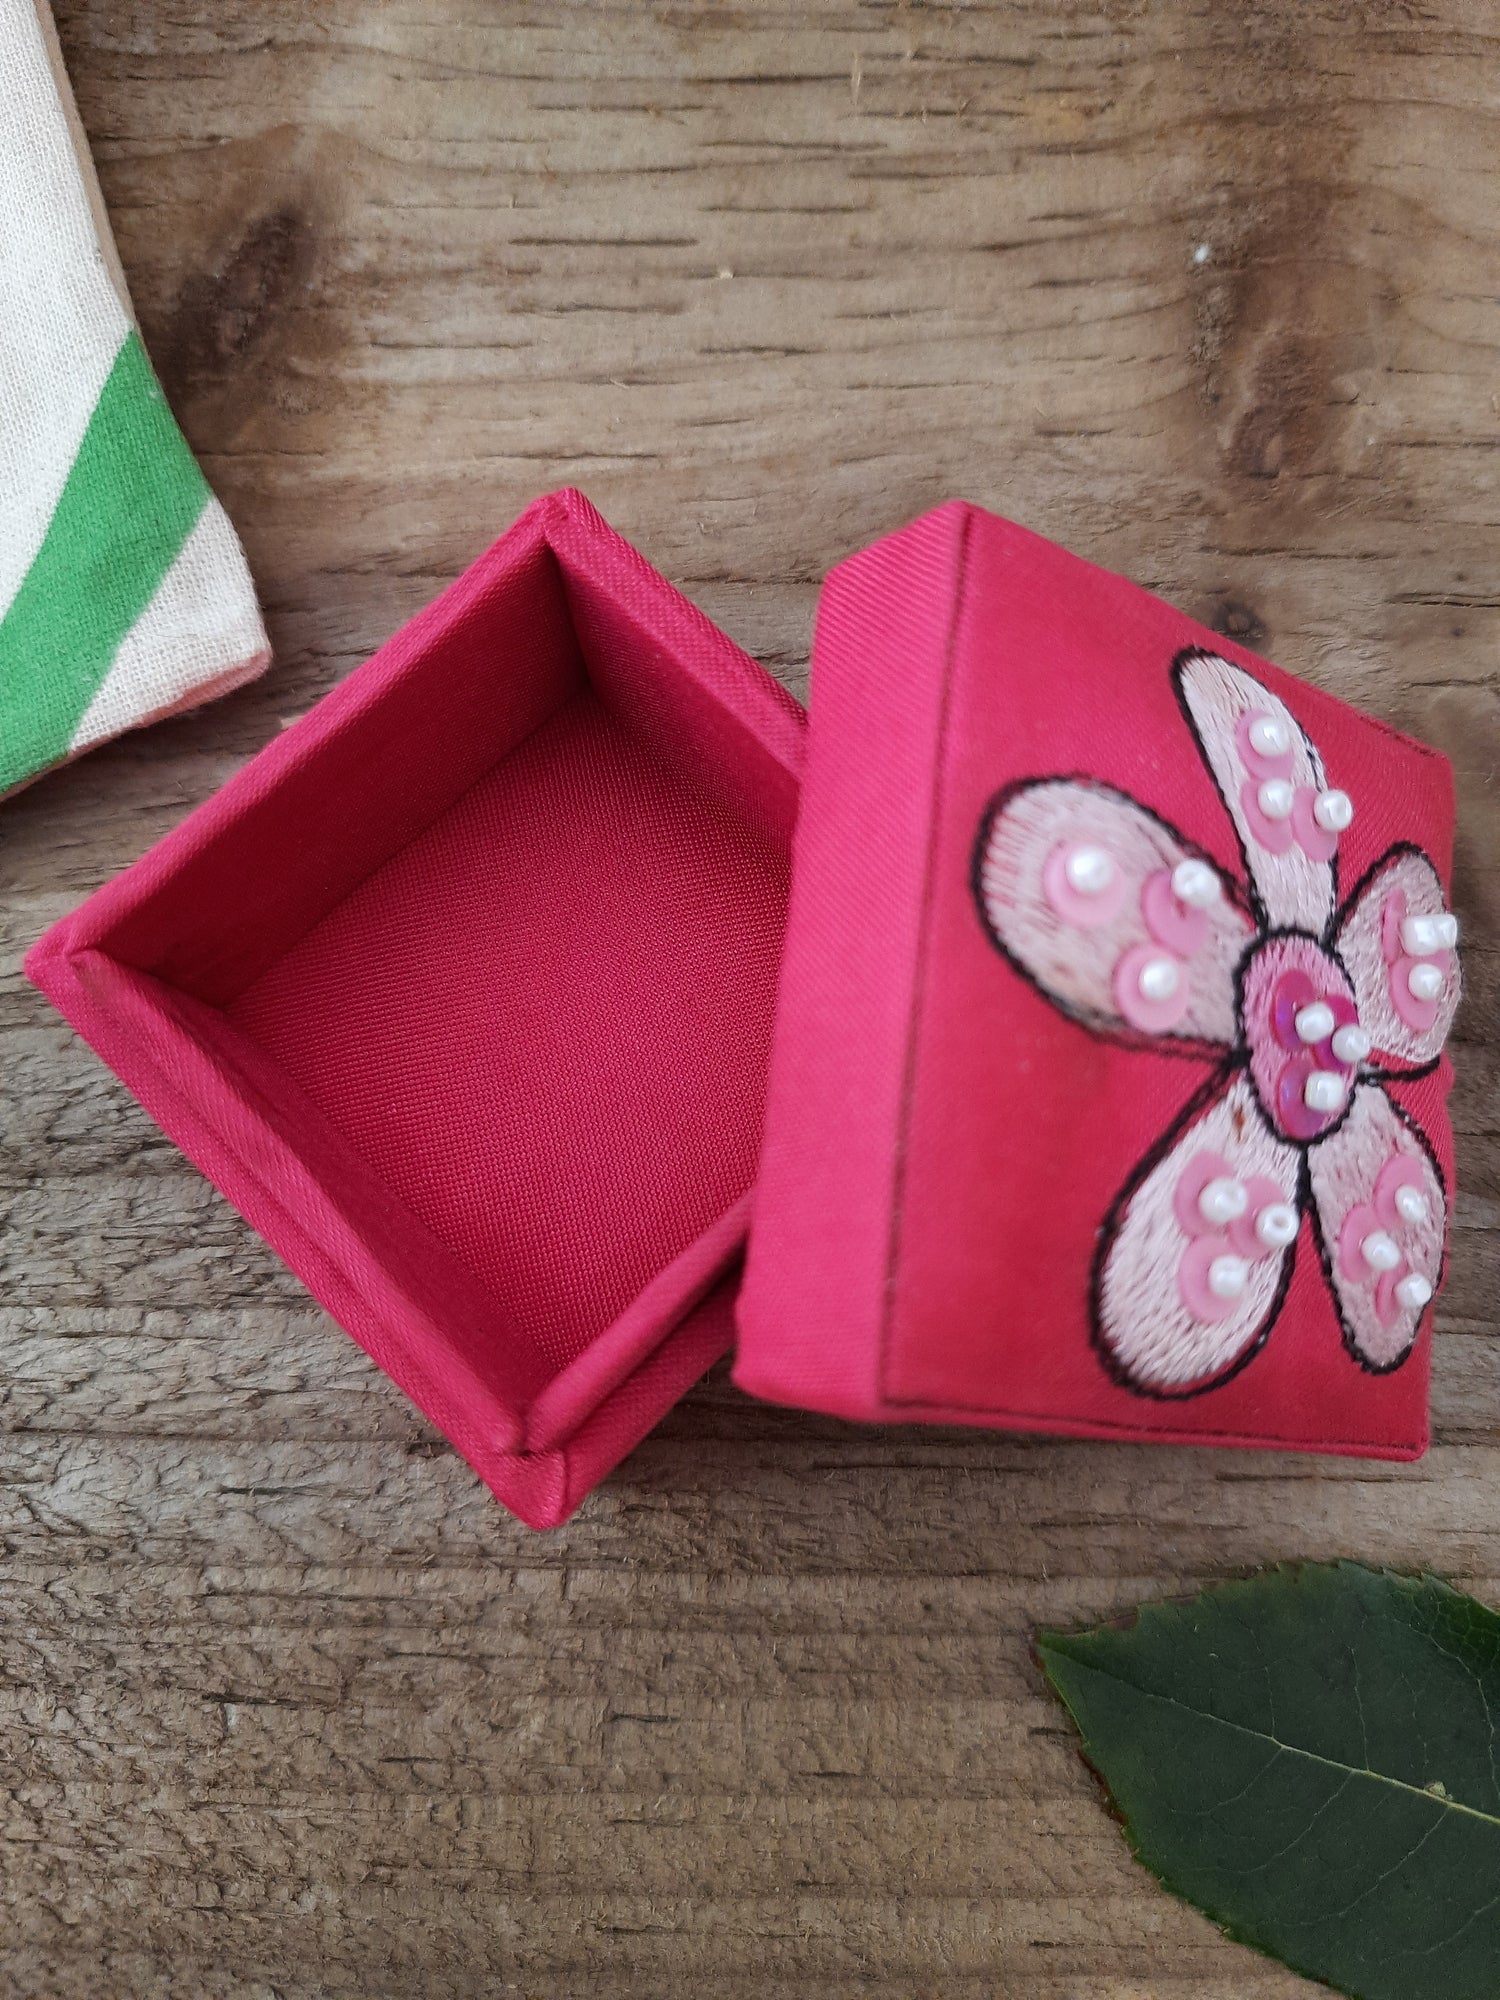 Jewellery Boxes and Trinkets